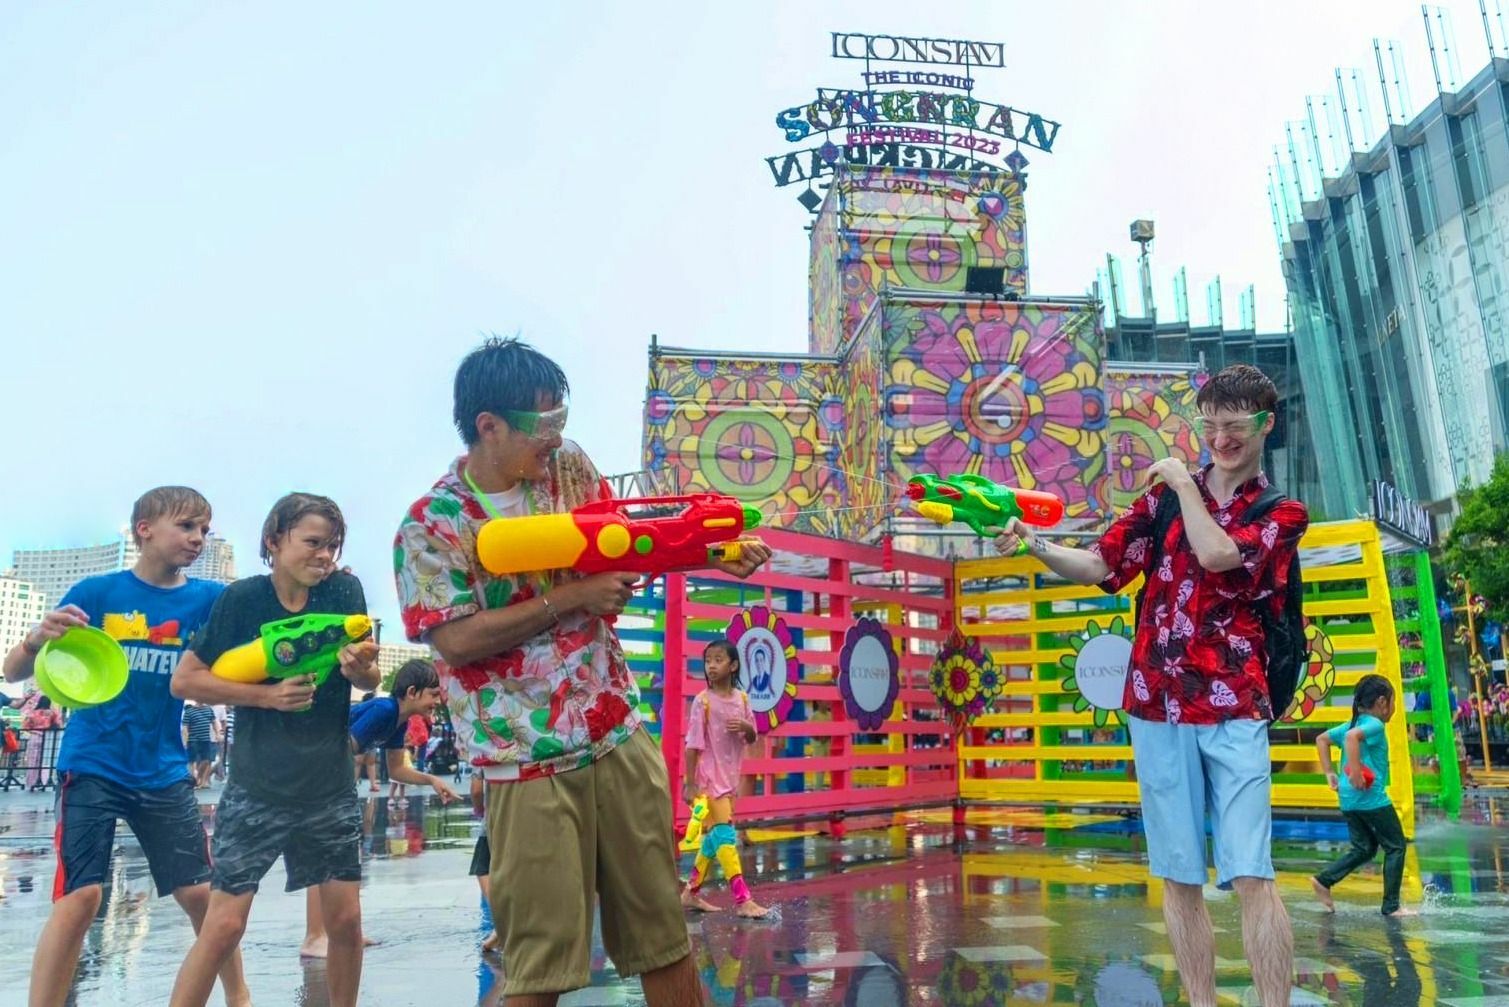 ICONSIAM’s ‘THAICONIC SONGKRAN CELEBRATION’ promises 12 Days of joy through water splashing and cultural activities | News by Thaiger